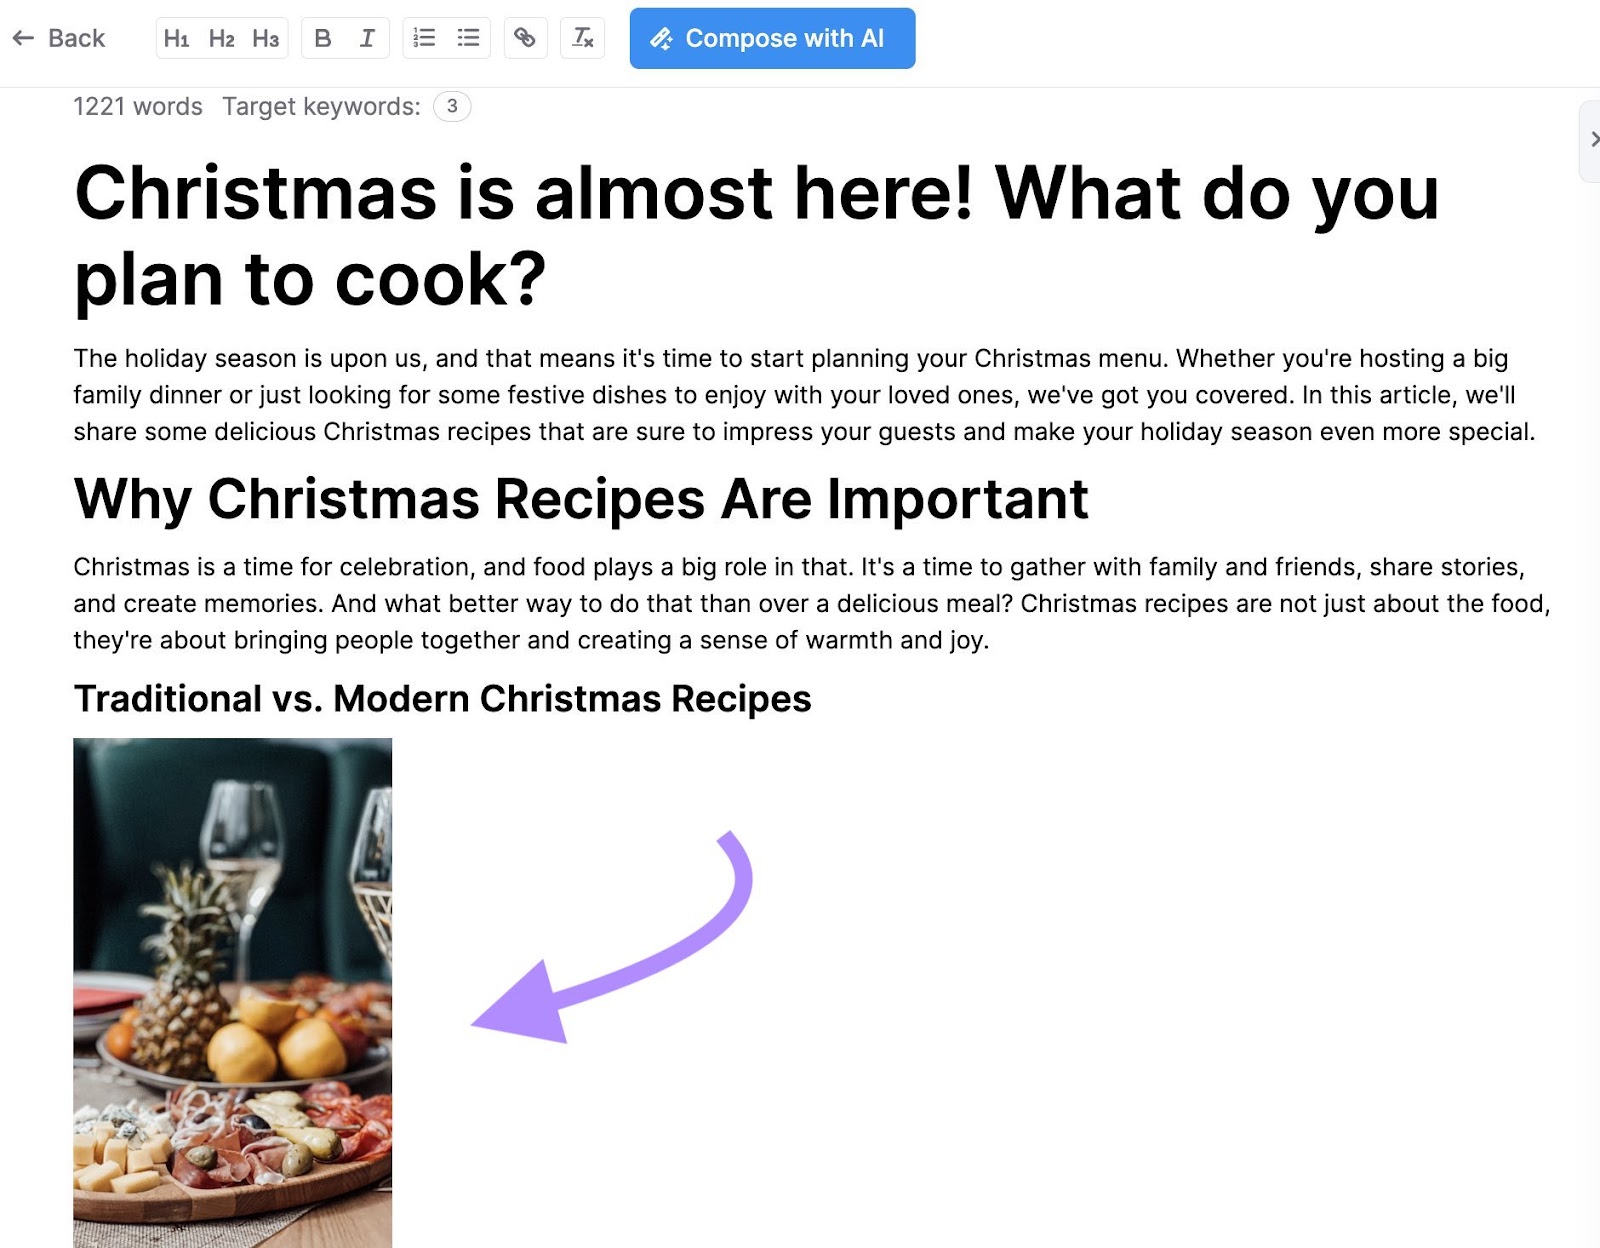 ContentShake AI-generated article on "Christmas is almost here! What do you plan to cook?"